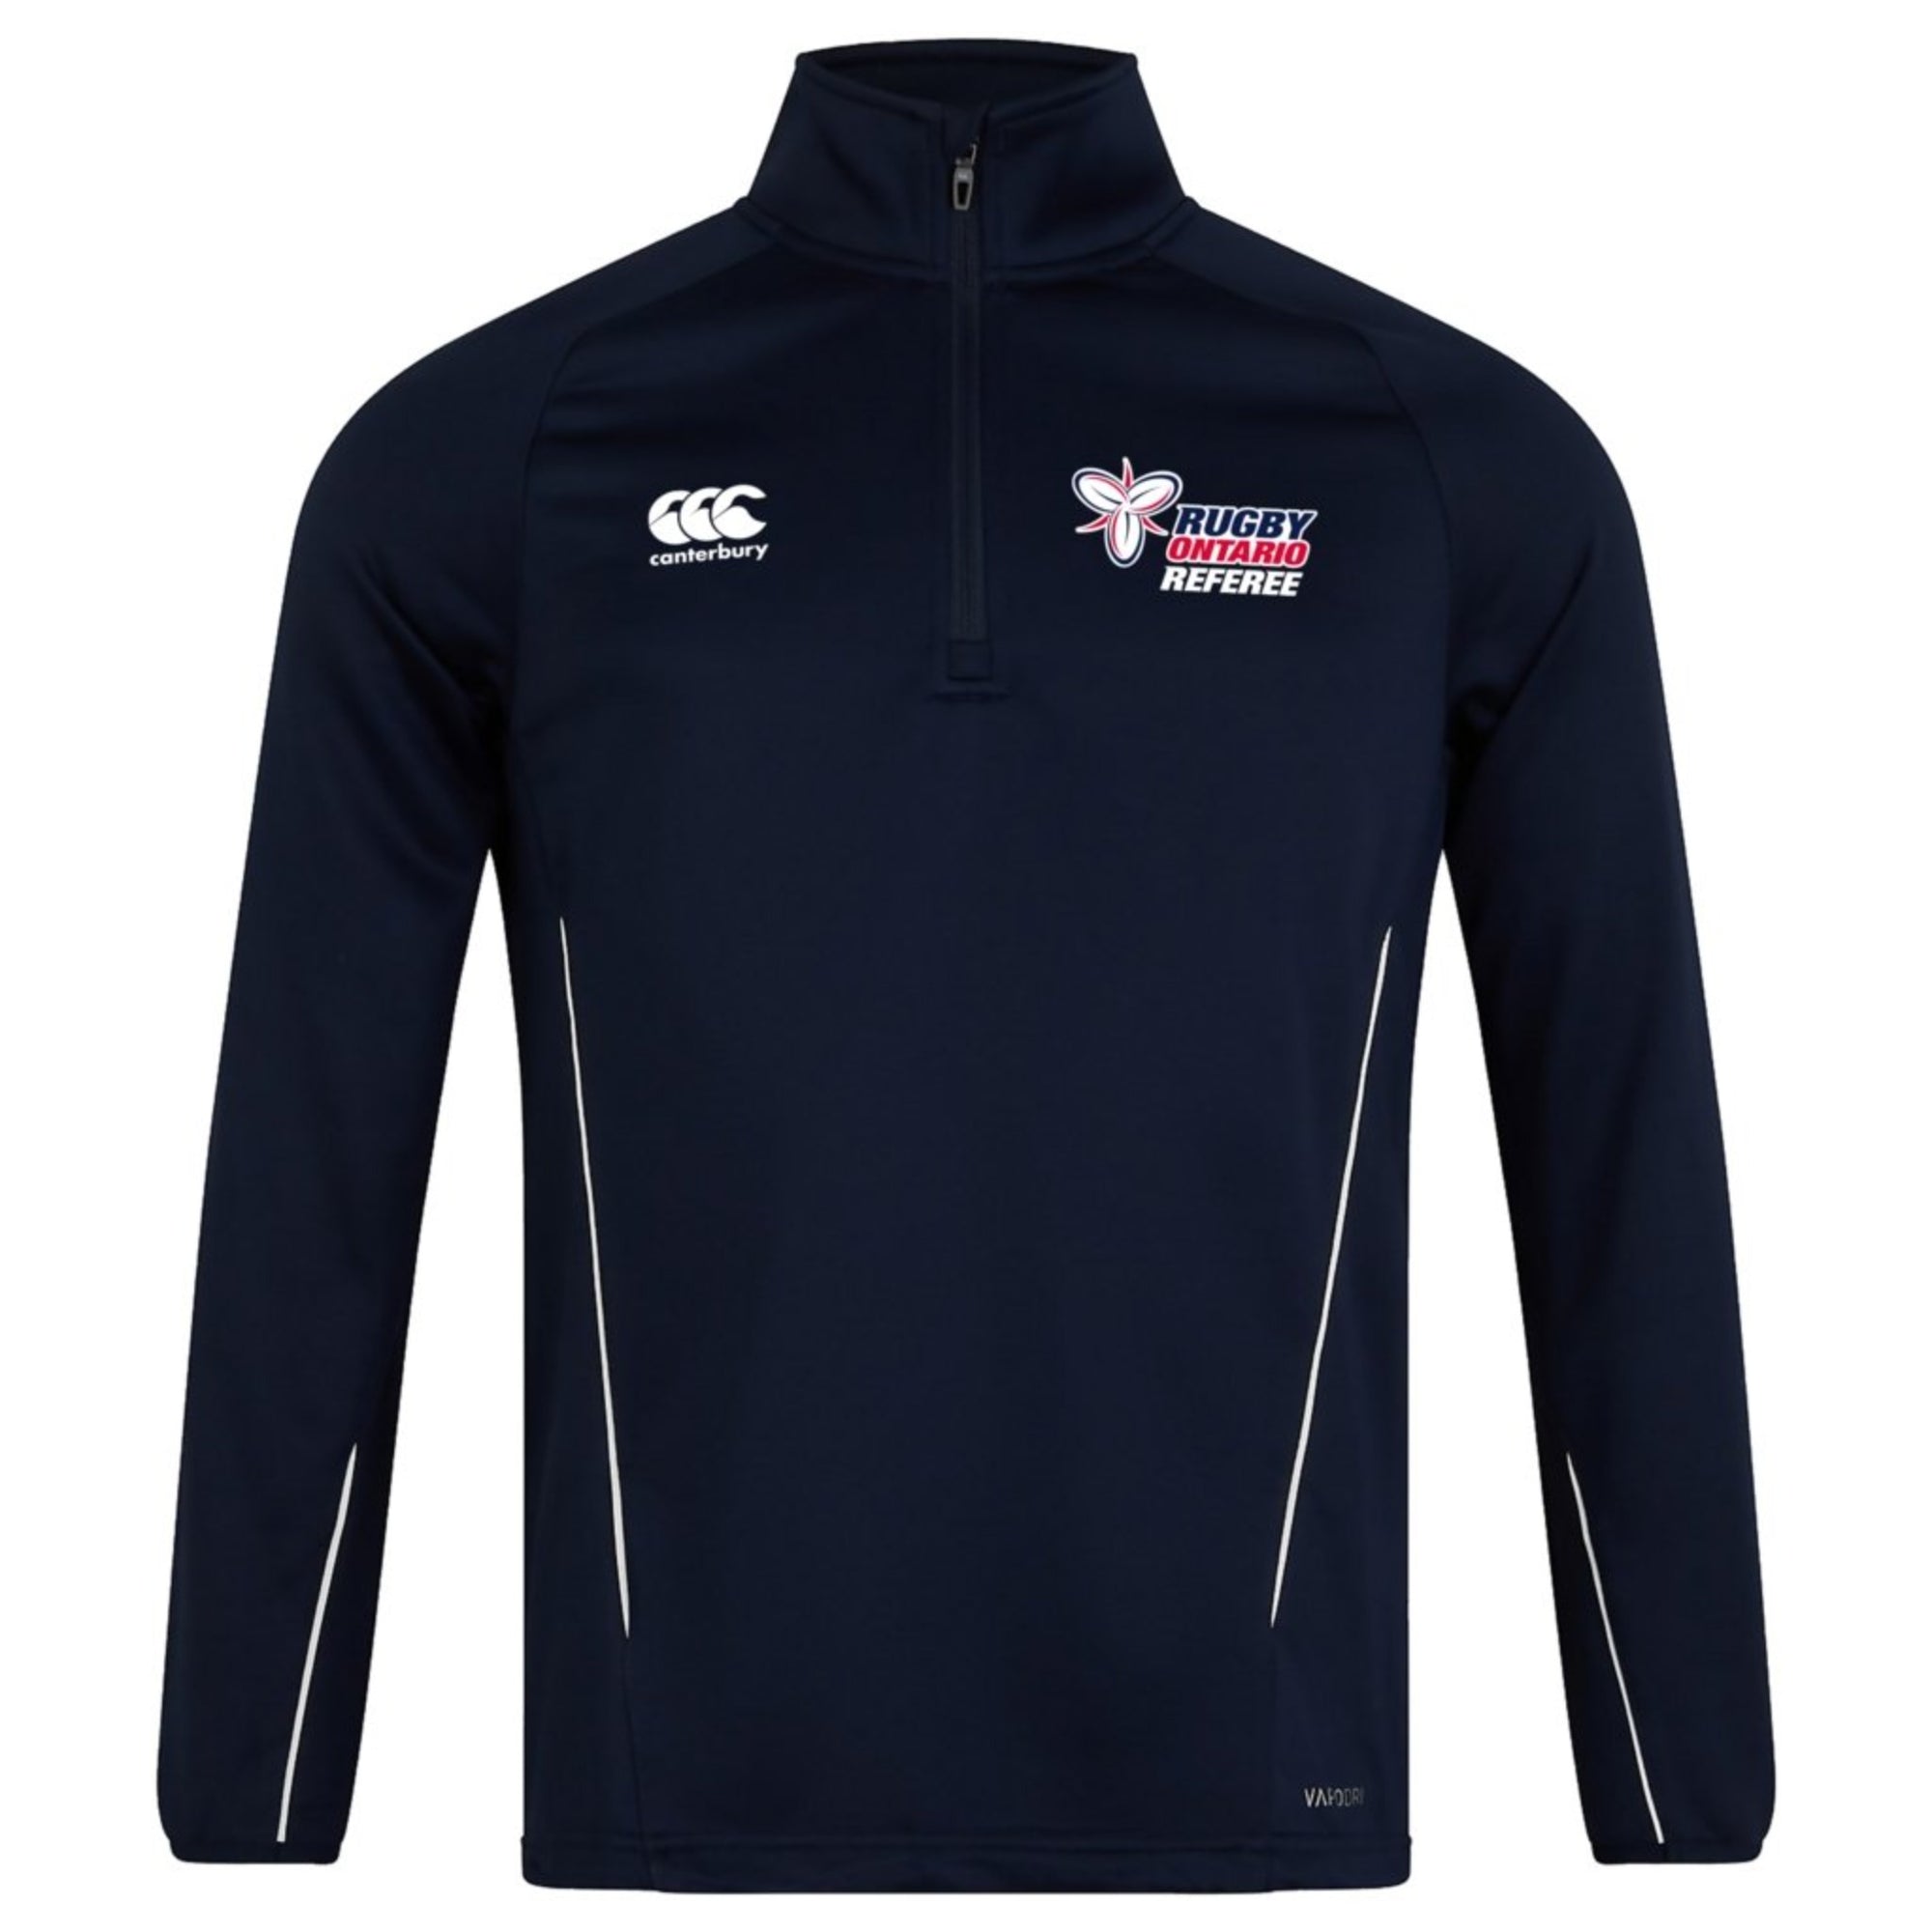 Rugby Ontario Referees CCC 1/4 Zip Mid-Layer Training Top - www.therugbyshop.com www.therugbyshop.com UNISEX / NAVY / XS TRS Distribution Canada 1/4 ZIPS Rugby Ontario Referees CCC 1/4 Zip Mid-Layer Training Top